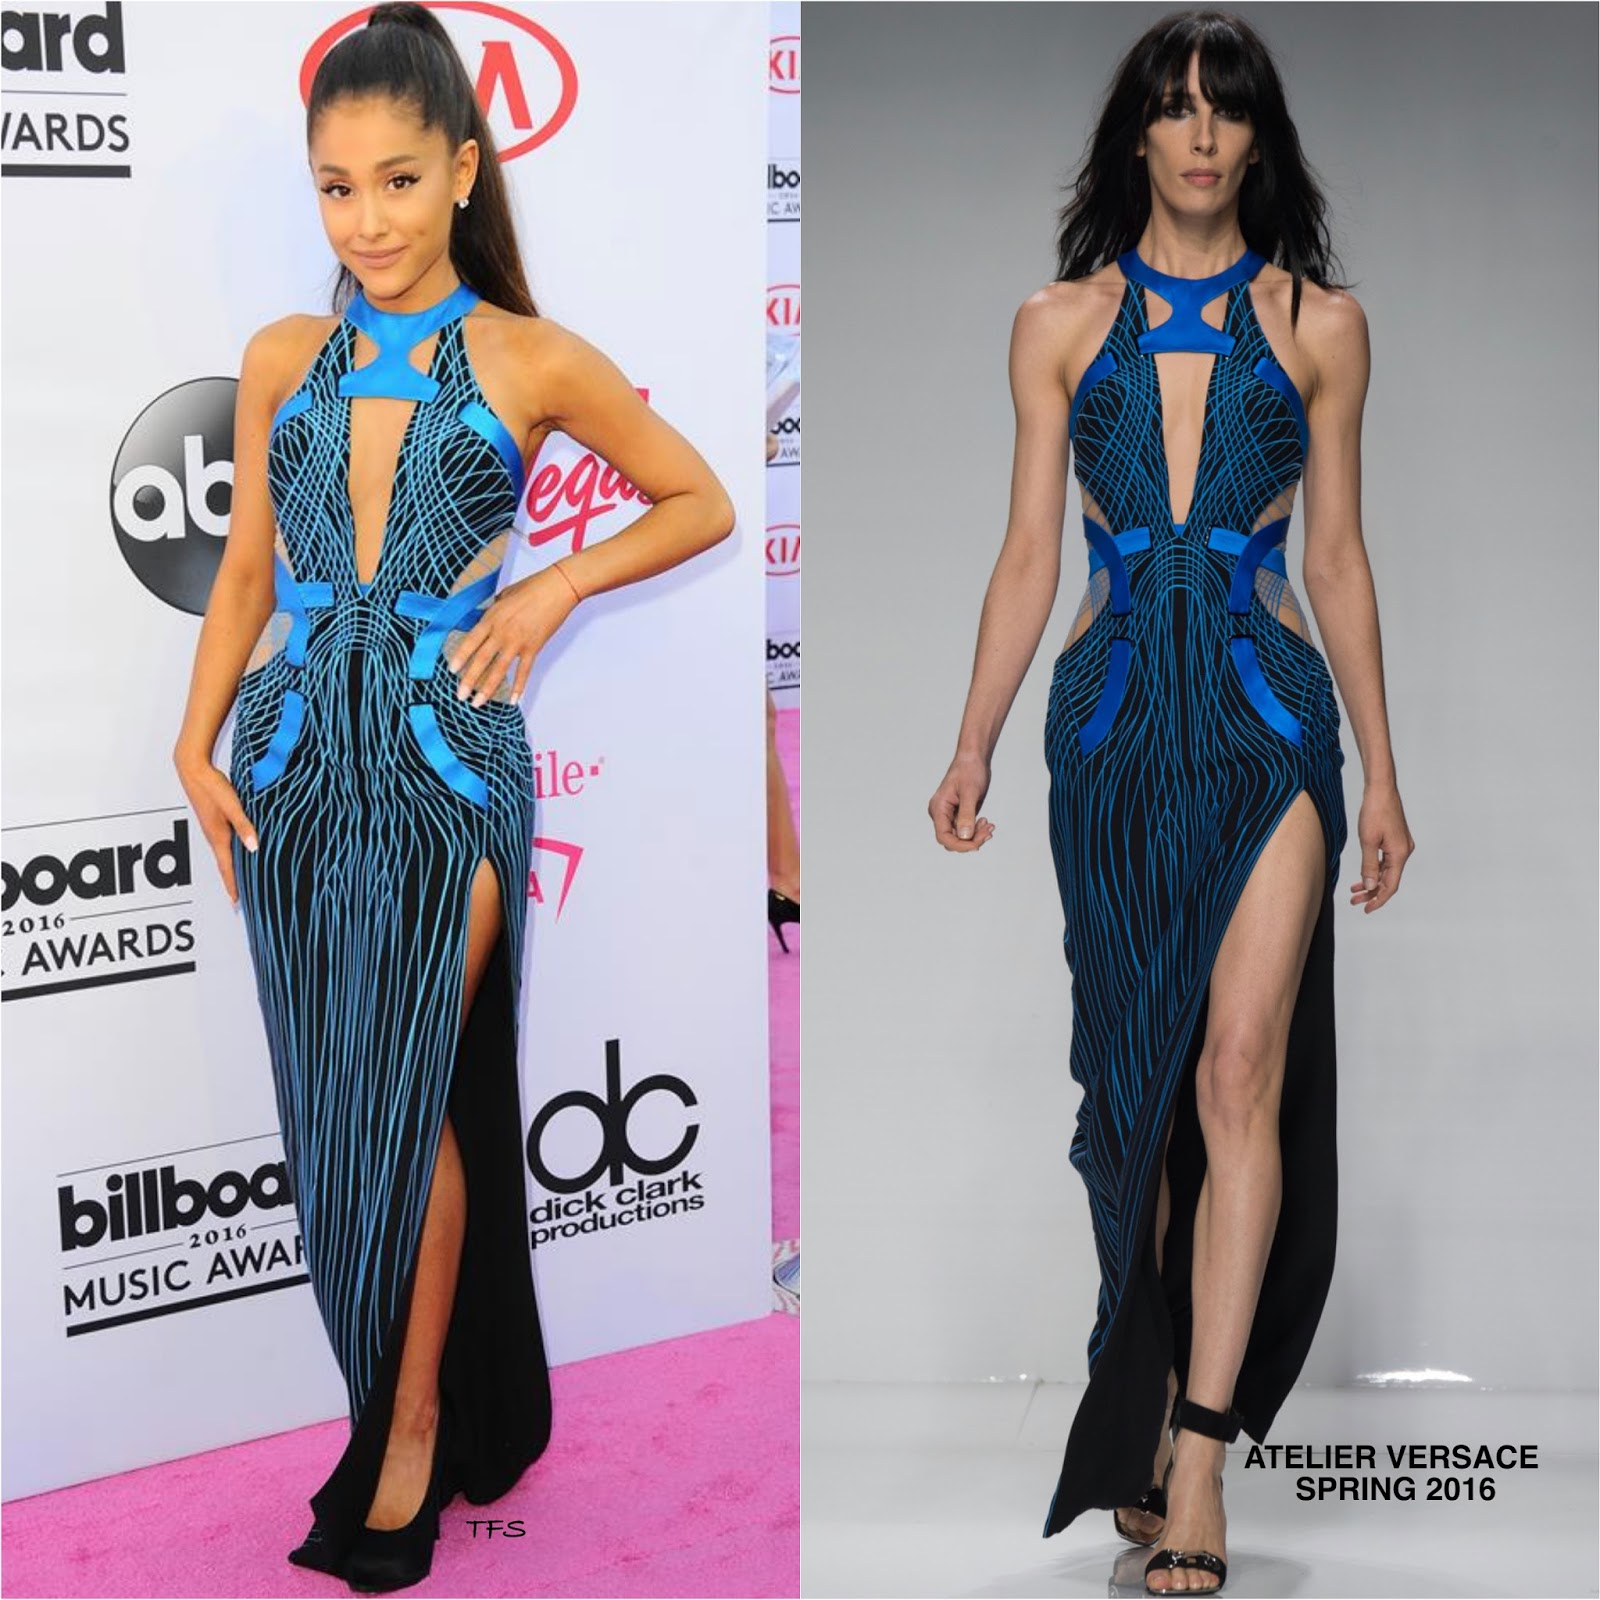 Ariana Grande in Atelier Versace at the 2016 Billboard Music Awards